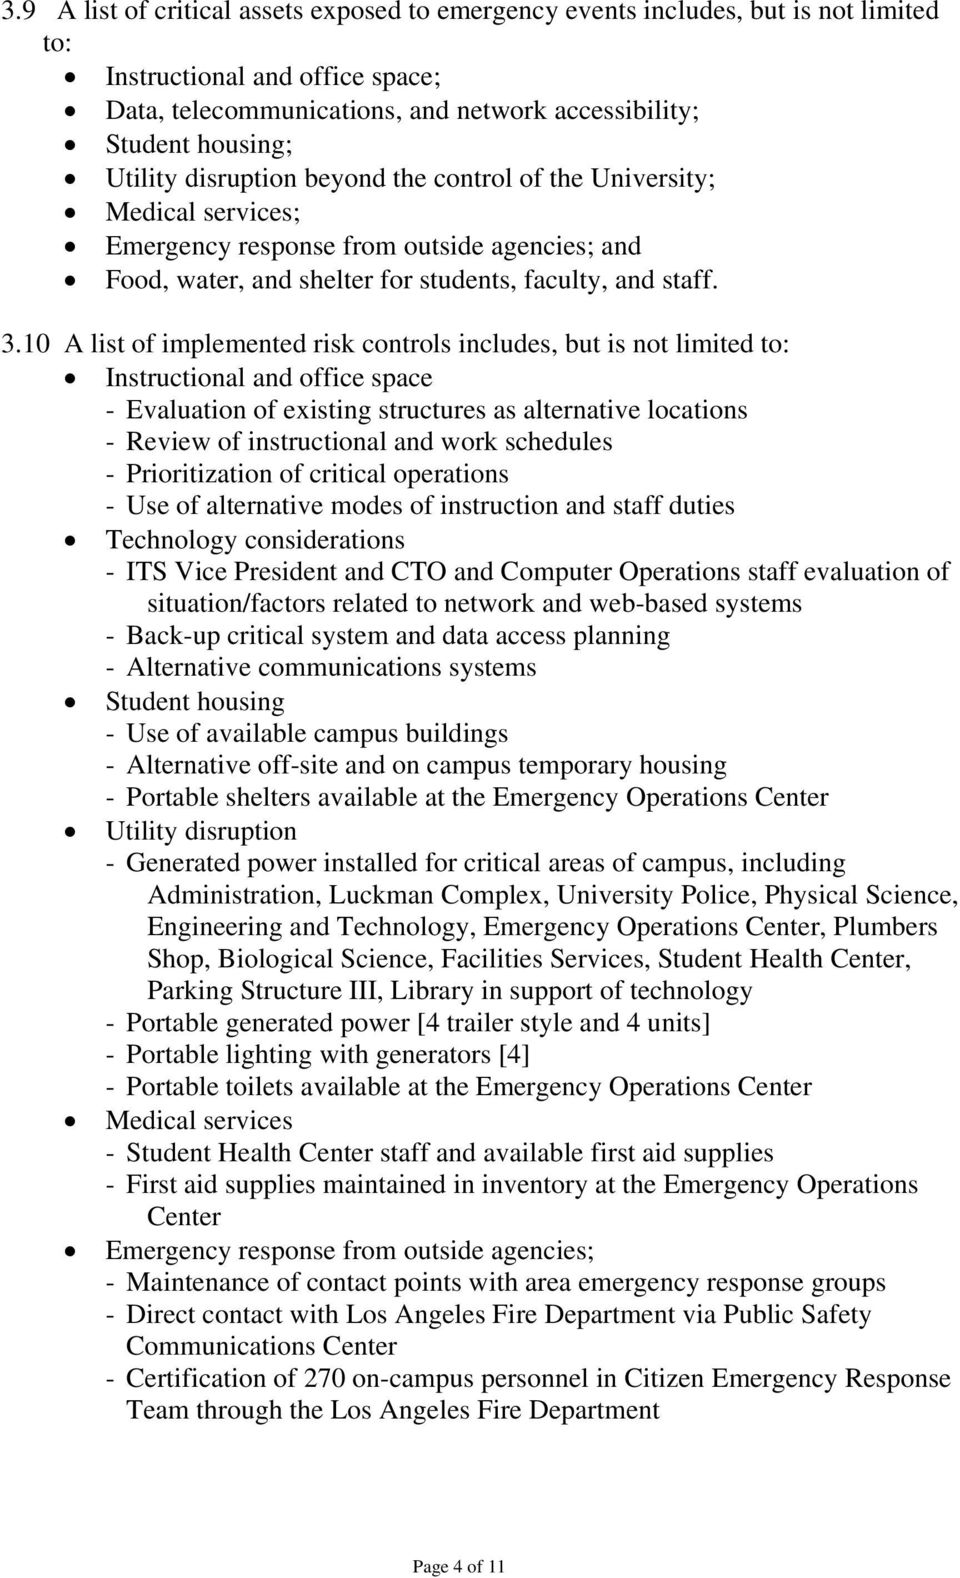 10 A list of implemented risk controls includes, but is not limited to: Instructional and office space - Evaluation of existing structures as alternative locations - Review of instructional and work